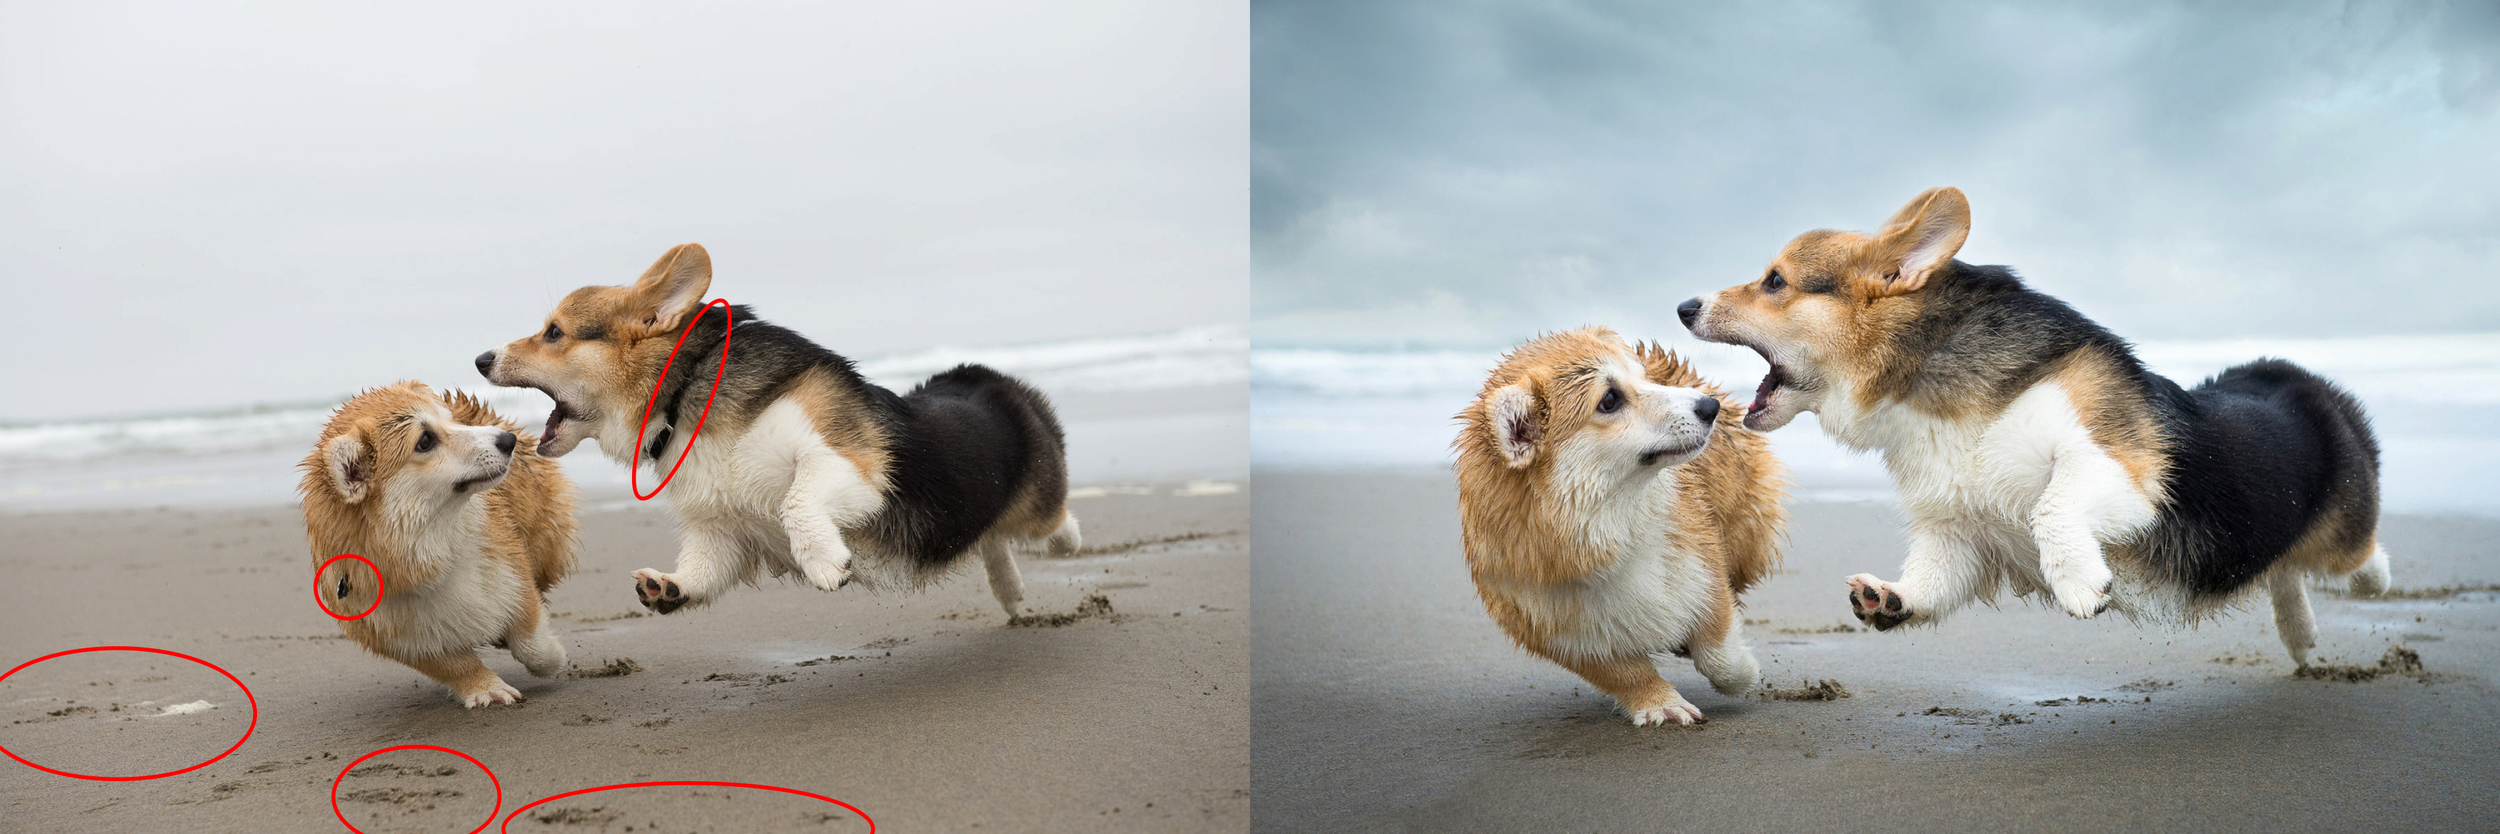 Before-after-photoshop-retouch-postproduction.jpg